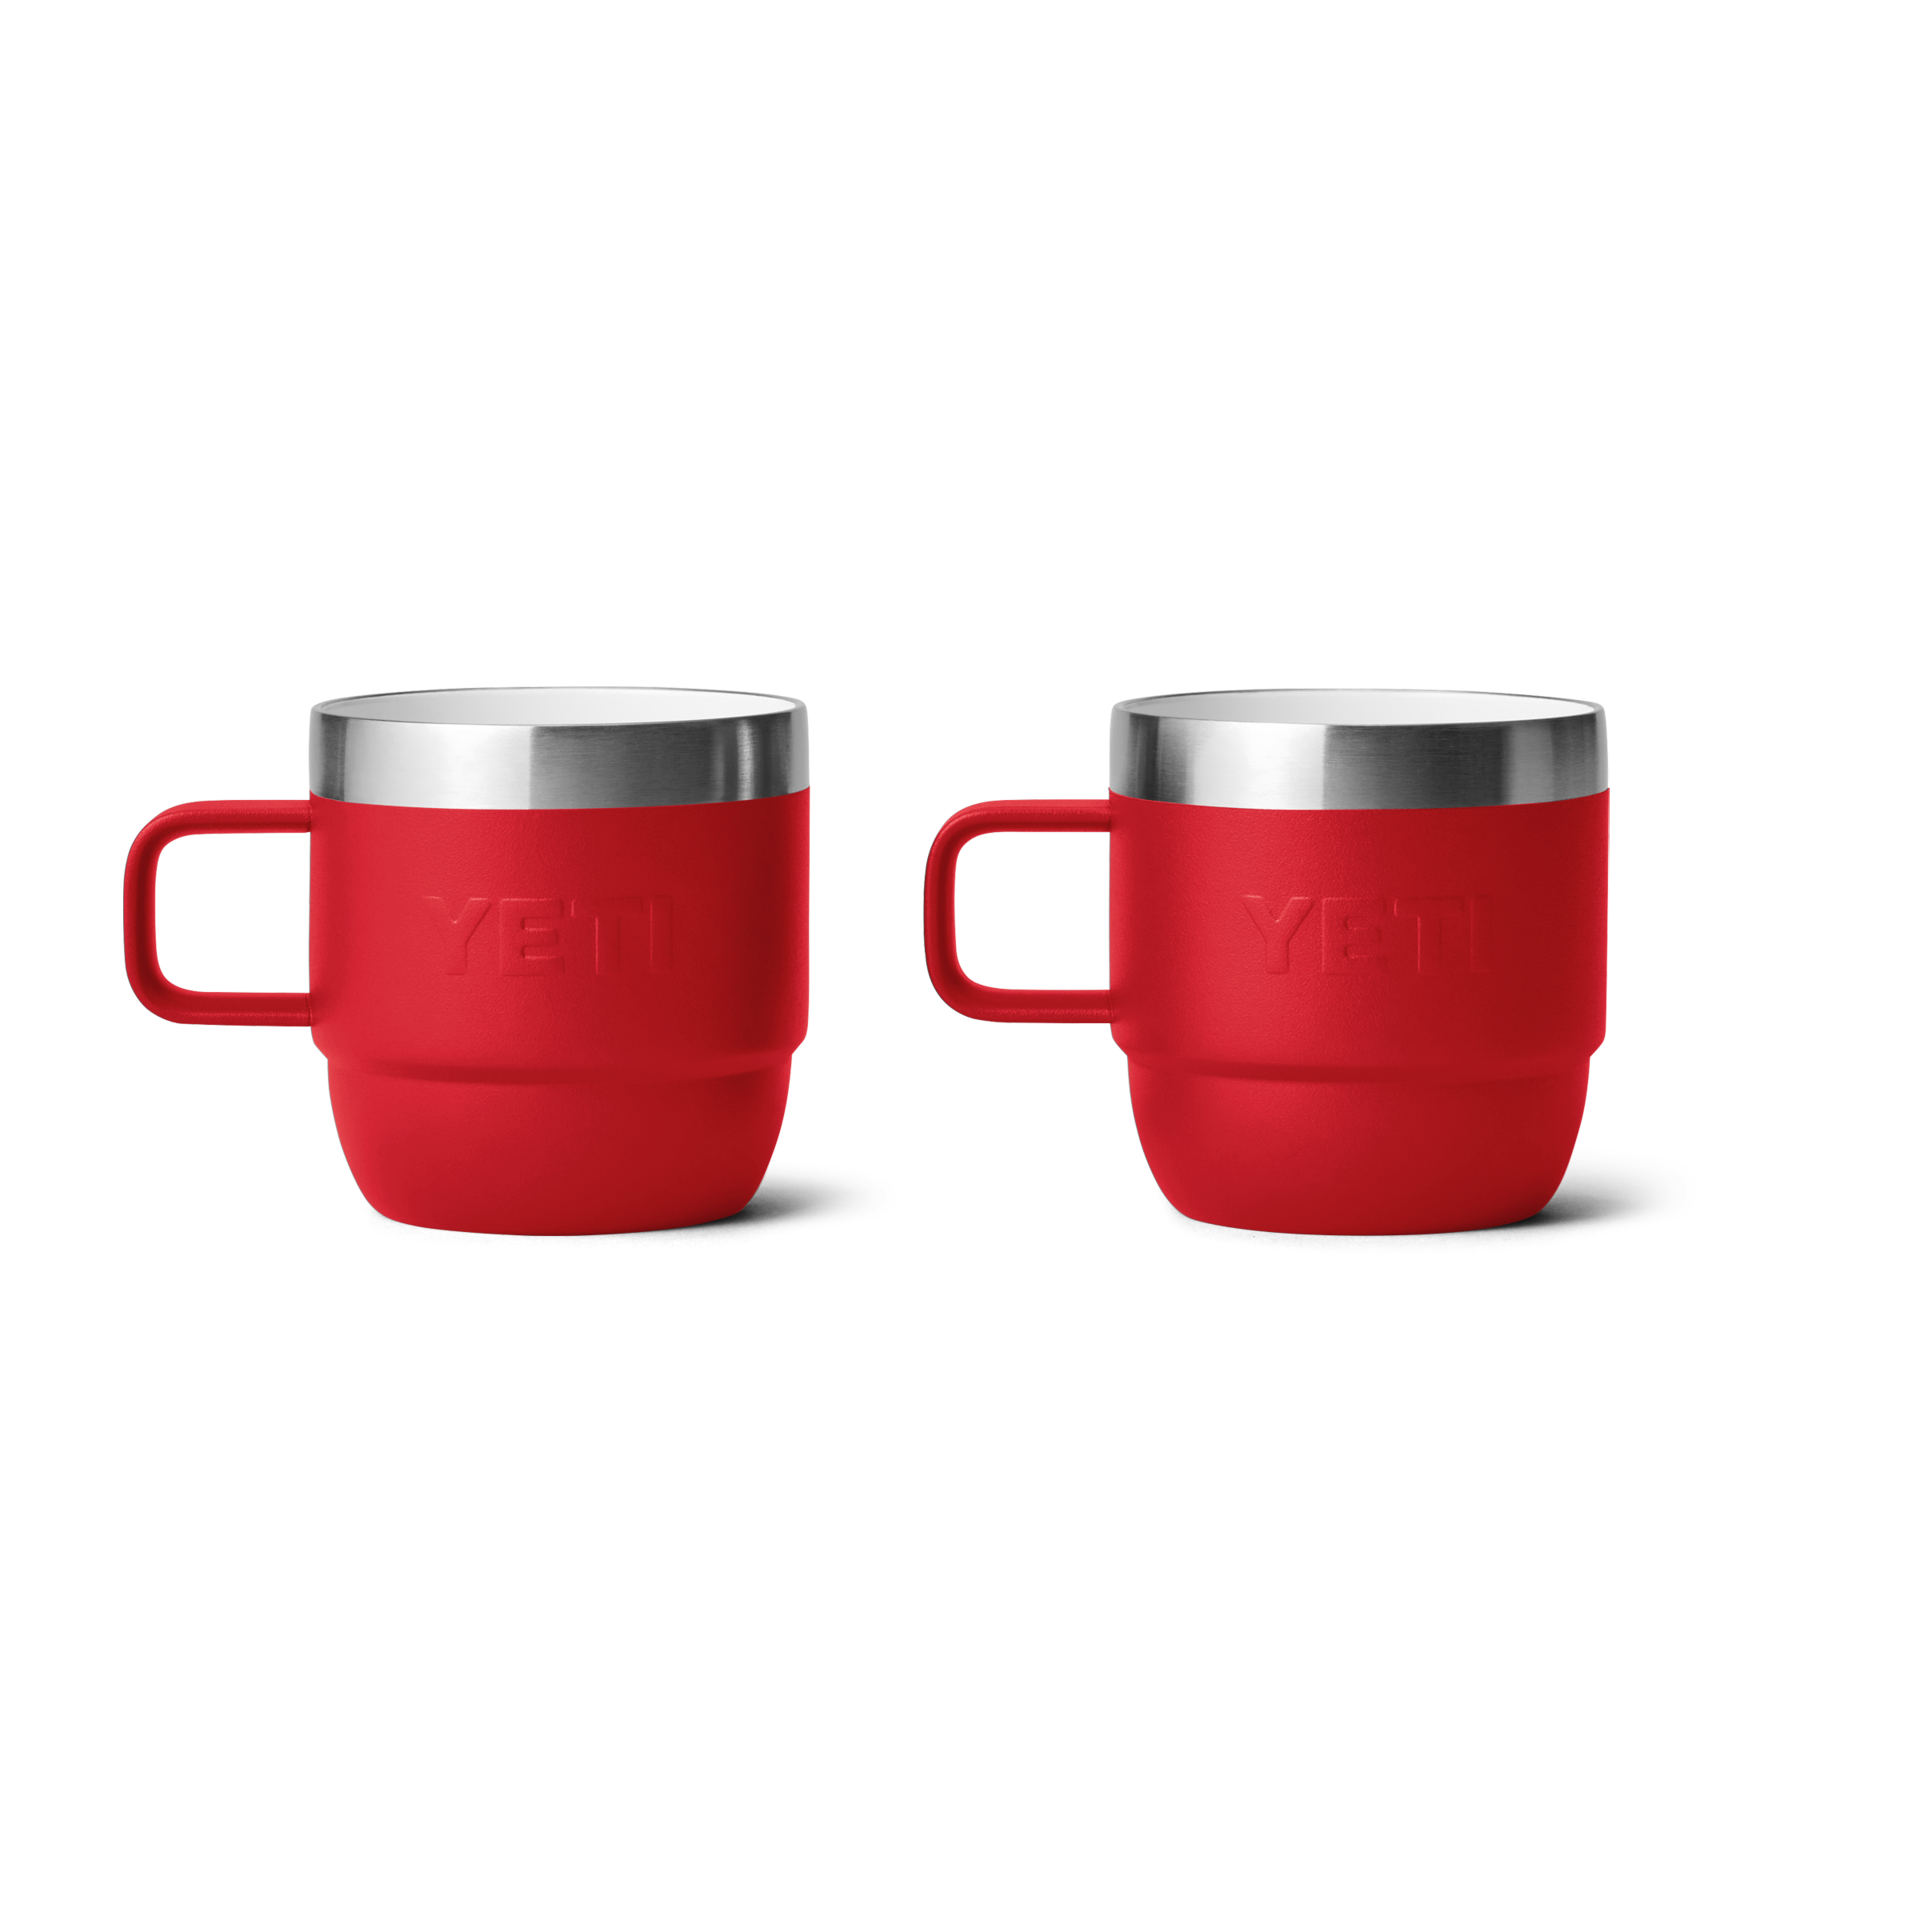 6 oz. / 177ml Stackable Mugs - Rescue Red (2 pack)